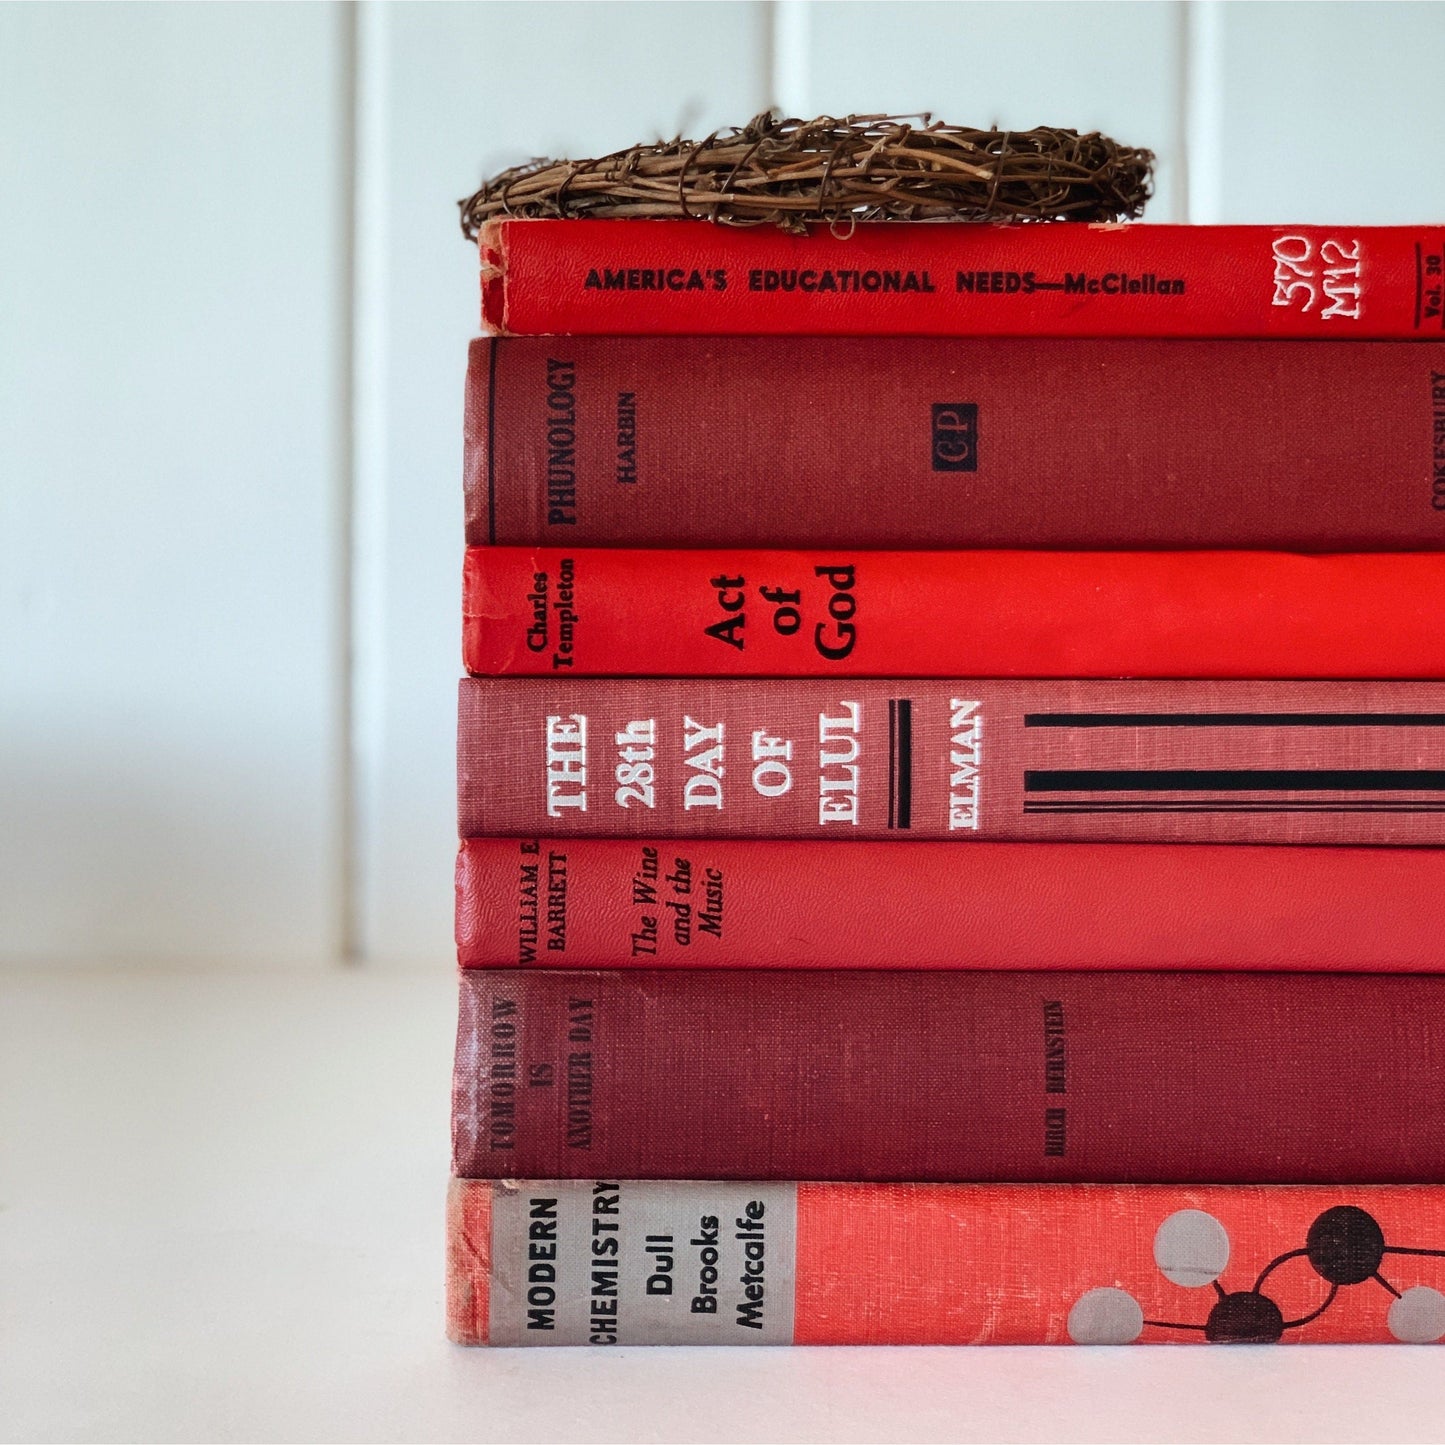 Vintage Decorative Books, Mid-Century Modern Retro Red and Black Book Collection, Books By Color, Masculine Shelf Decor